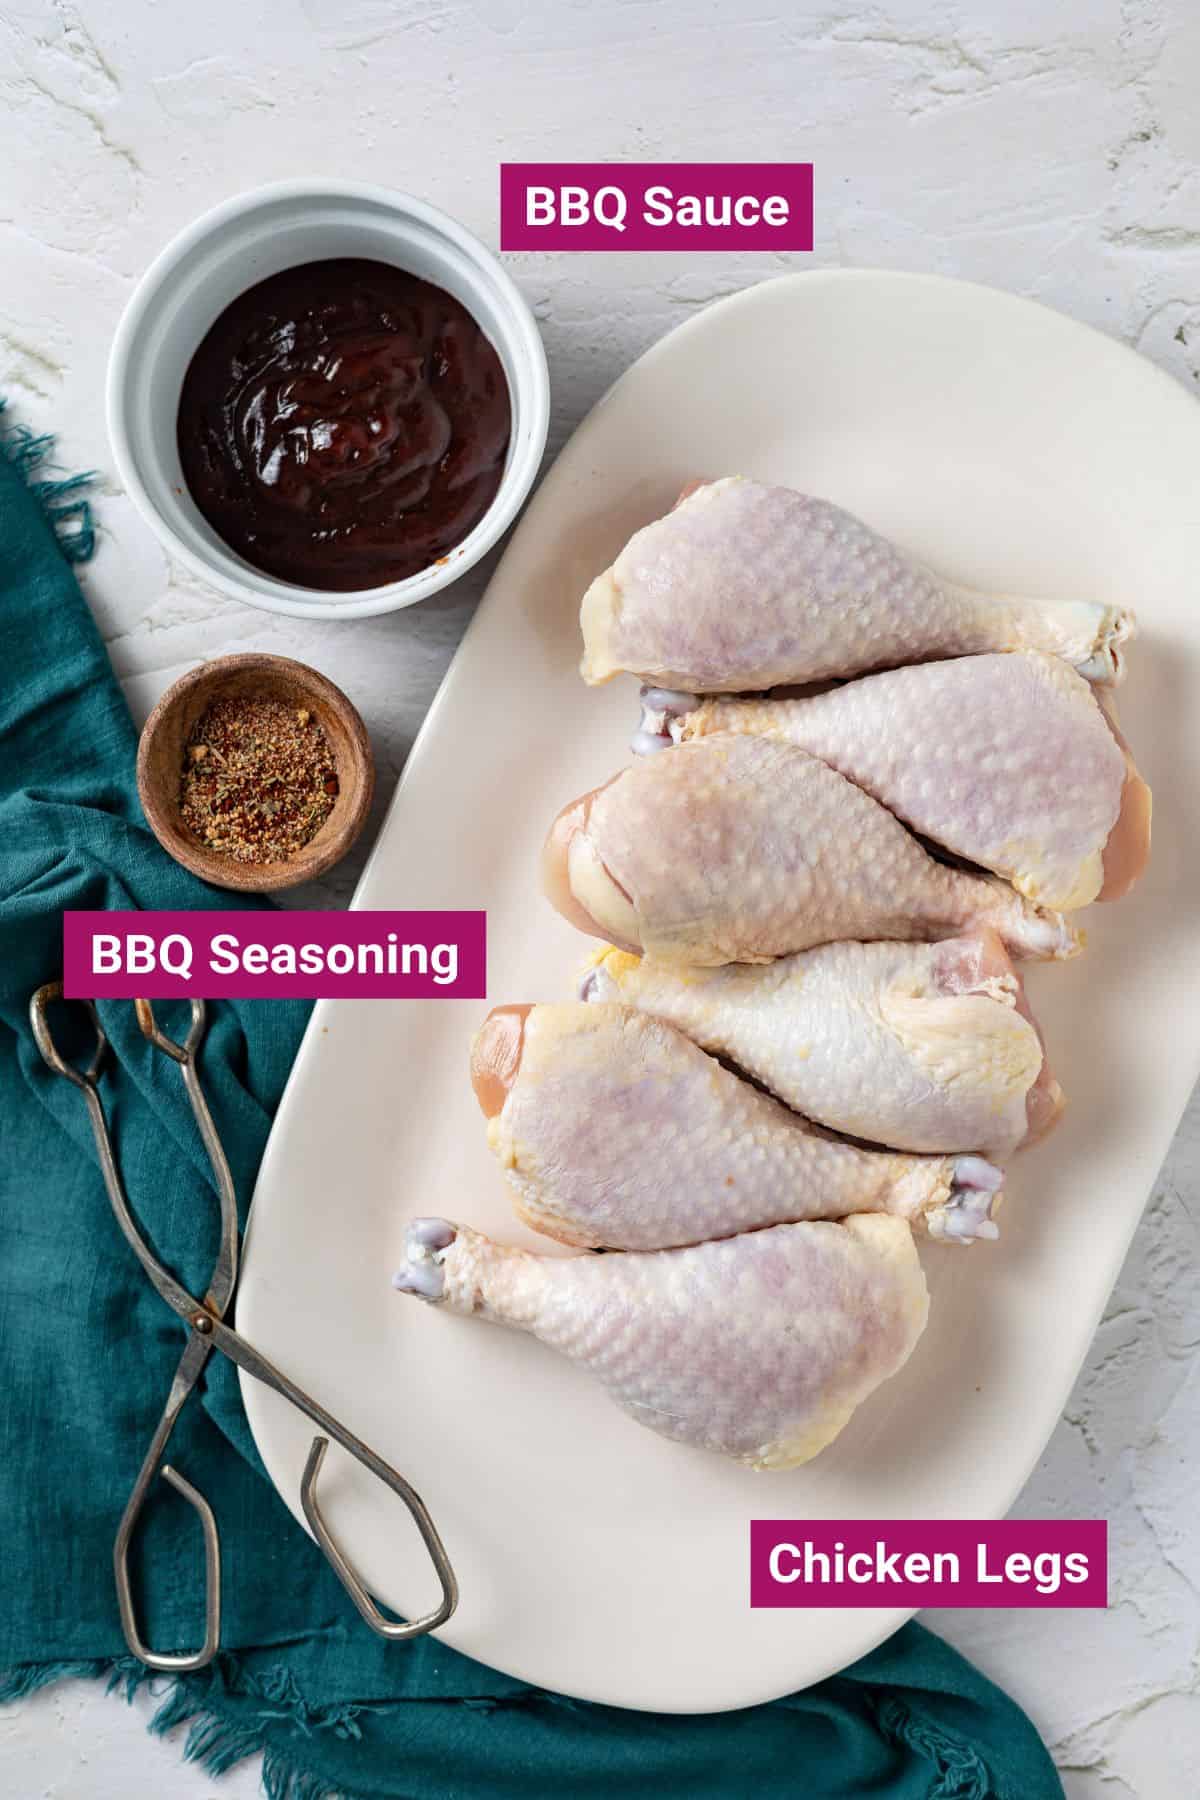 bbq sauce & bbq seasoning on separate bowls and chicken legs on a large plate